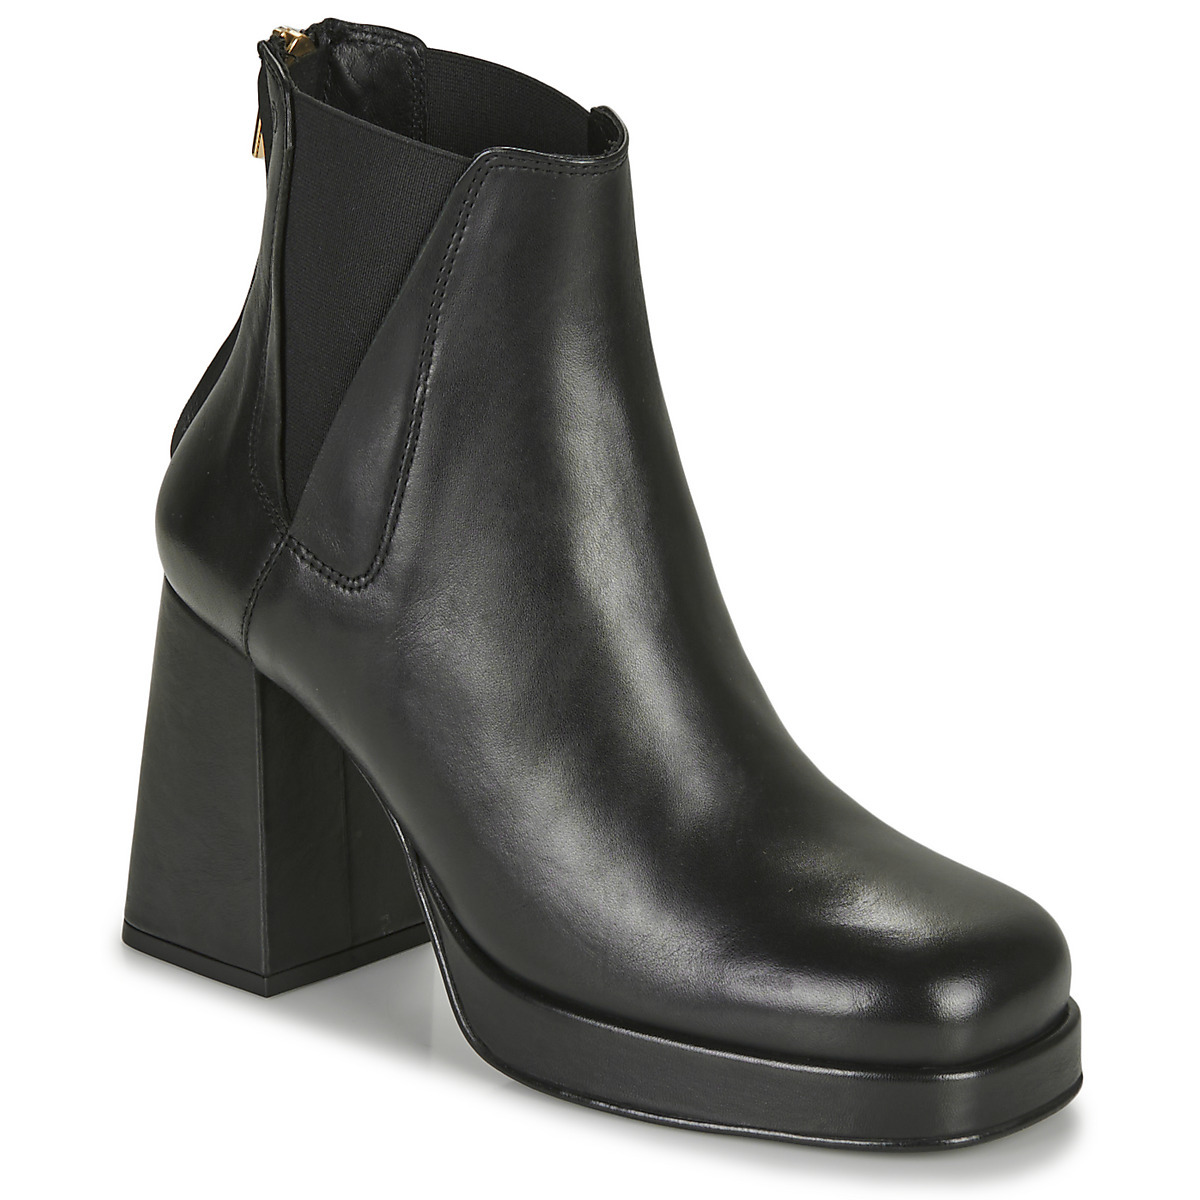 Spartoo Lady Ankle Boots in Black by Fericelli GOOFASH